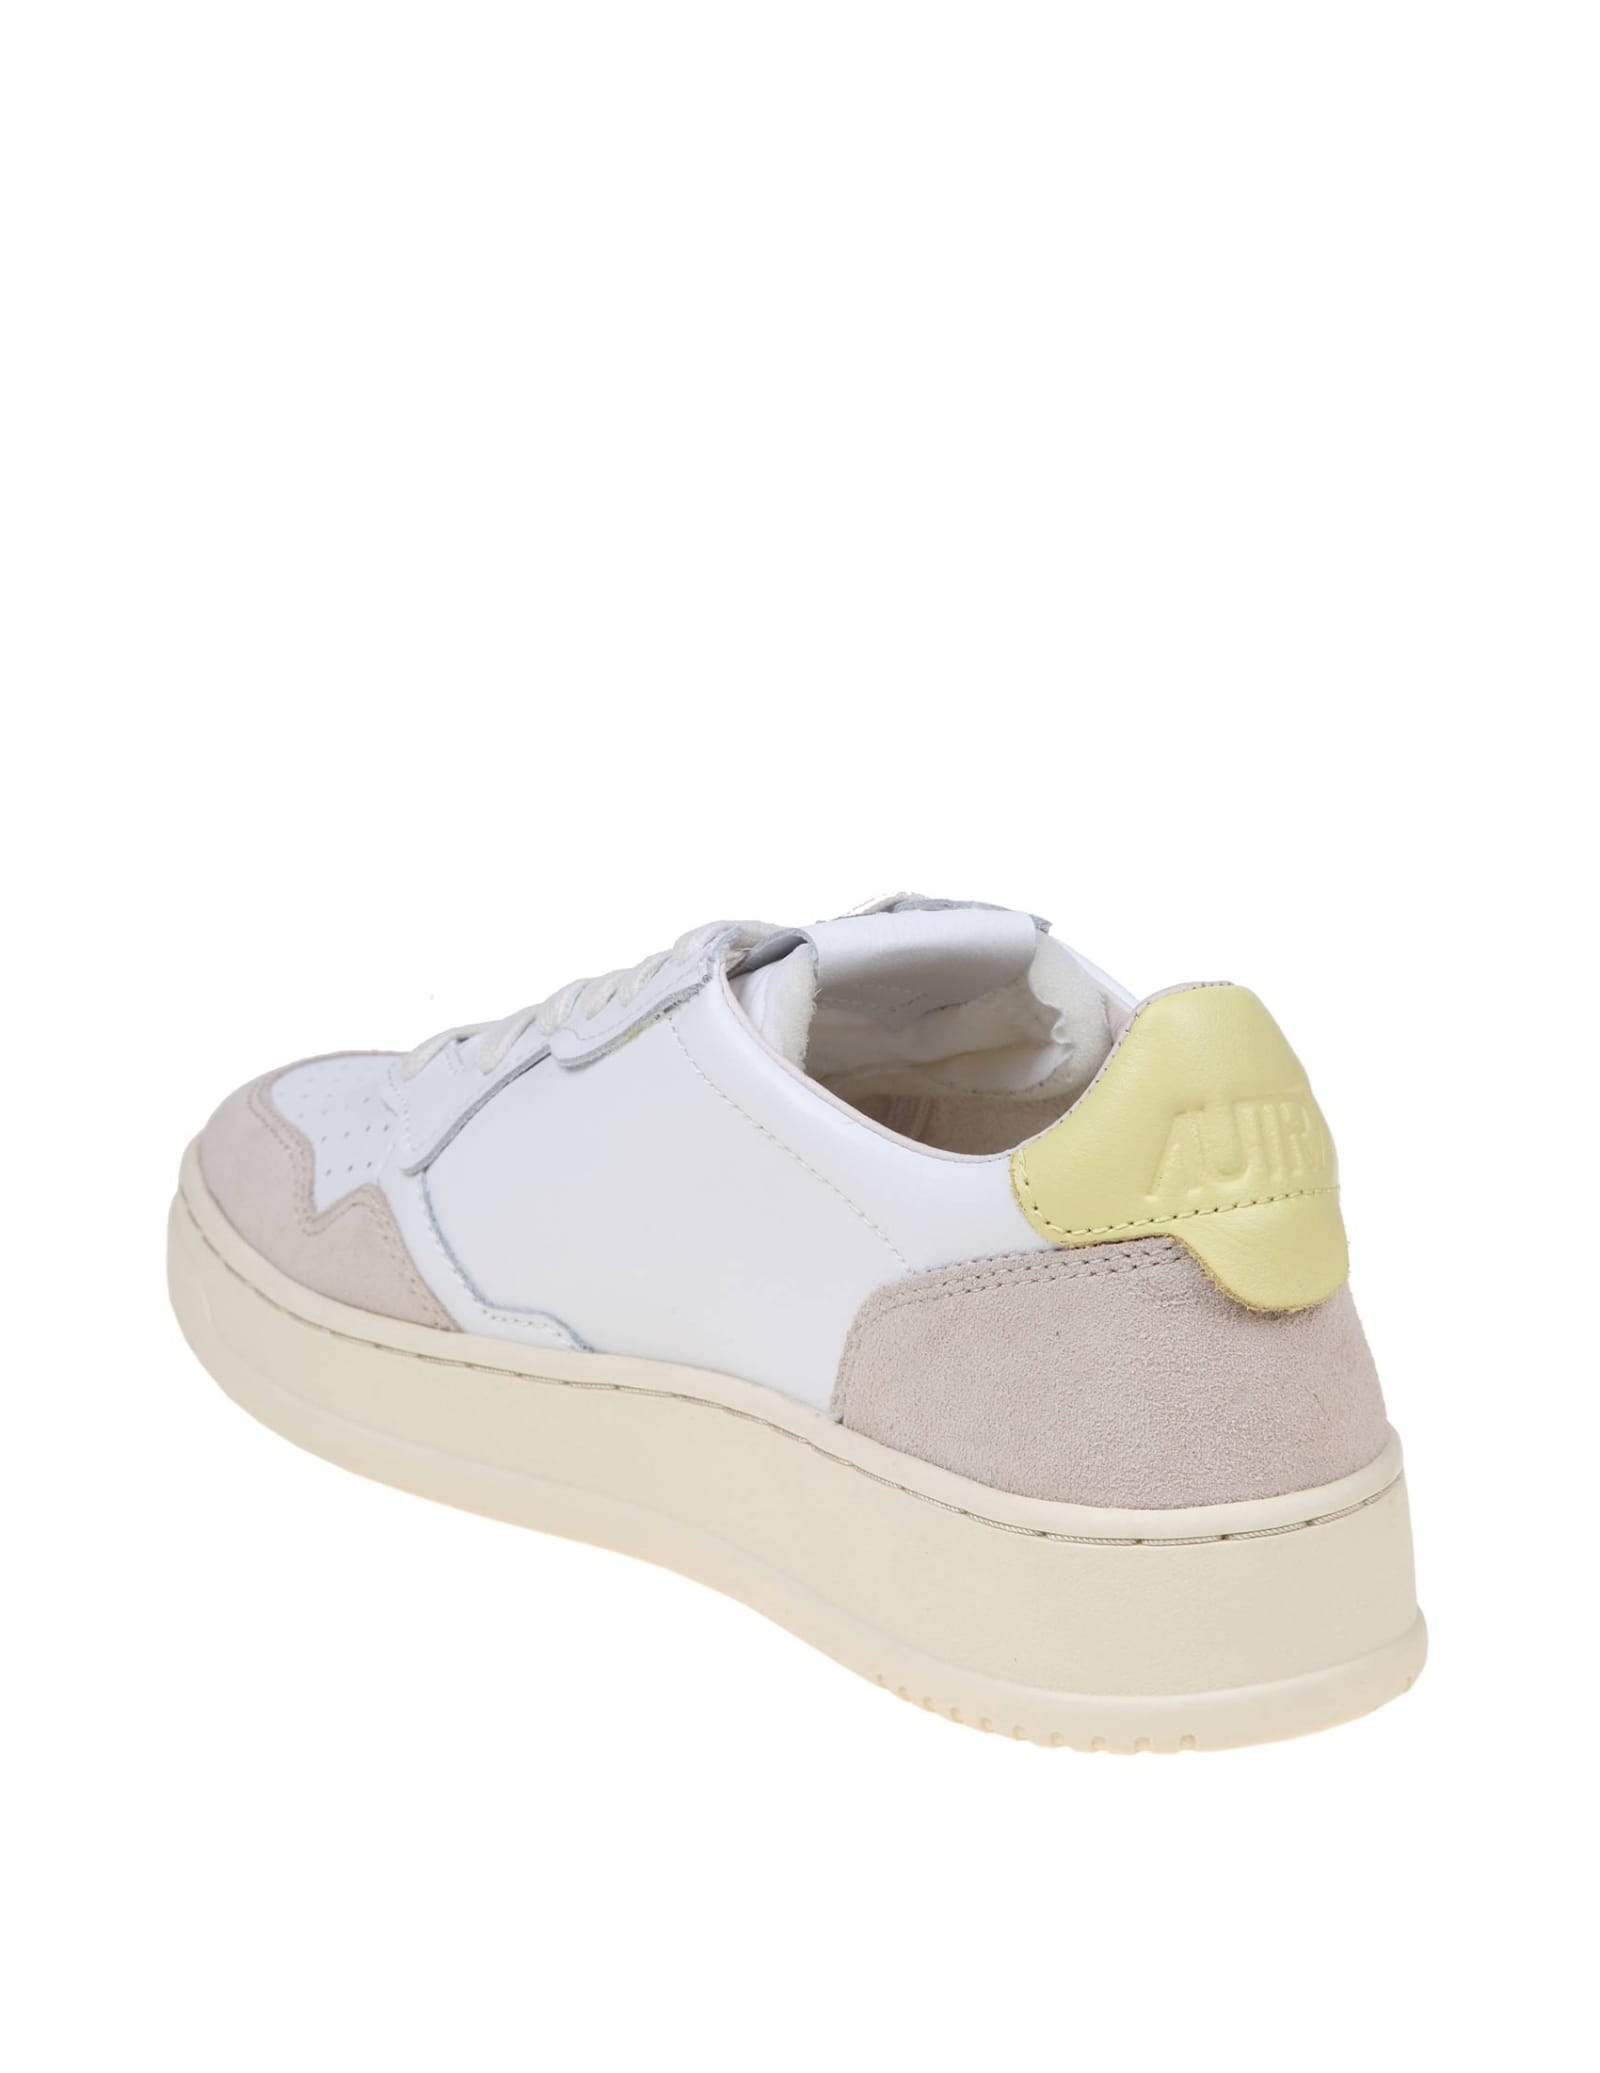 Shop Autry Sneakers In White And Yellow Leather And Suede In Bianco+giallo